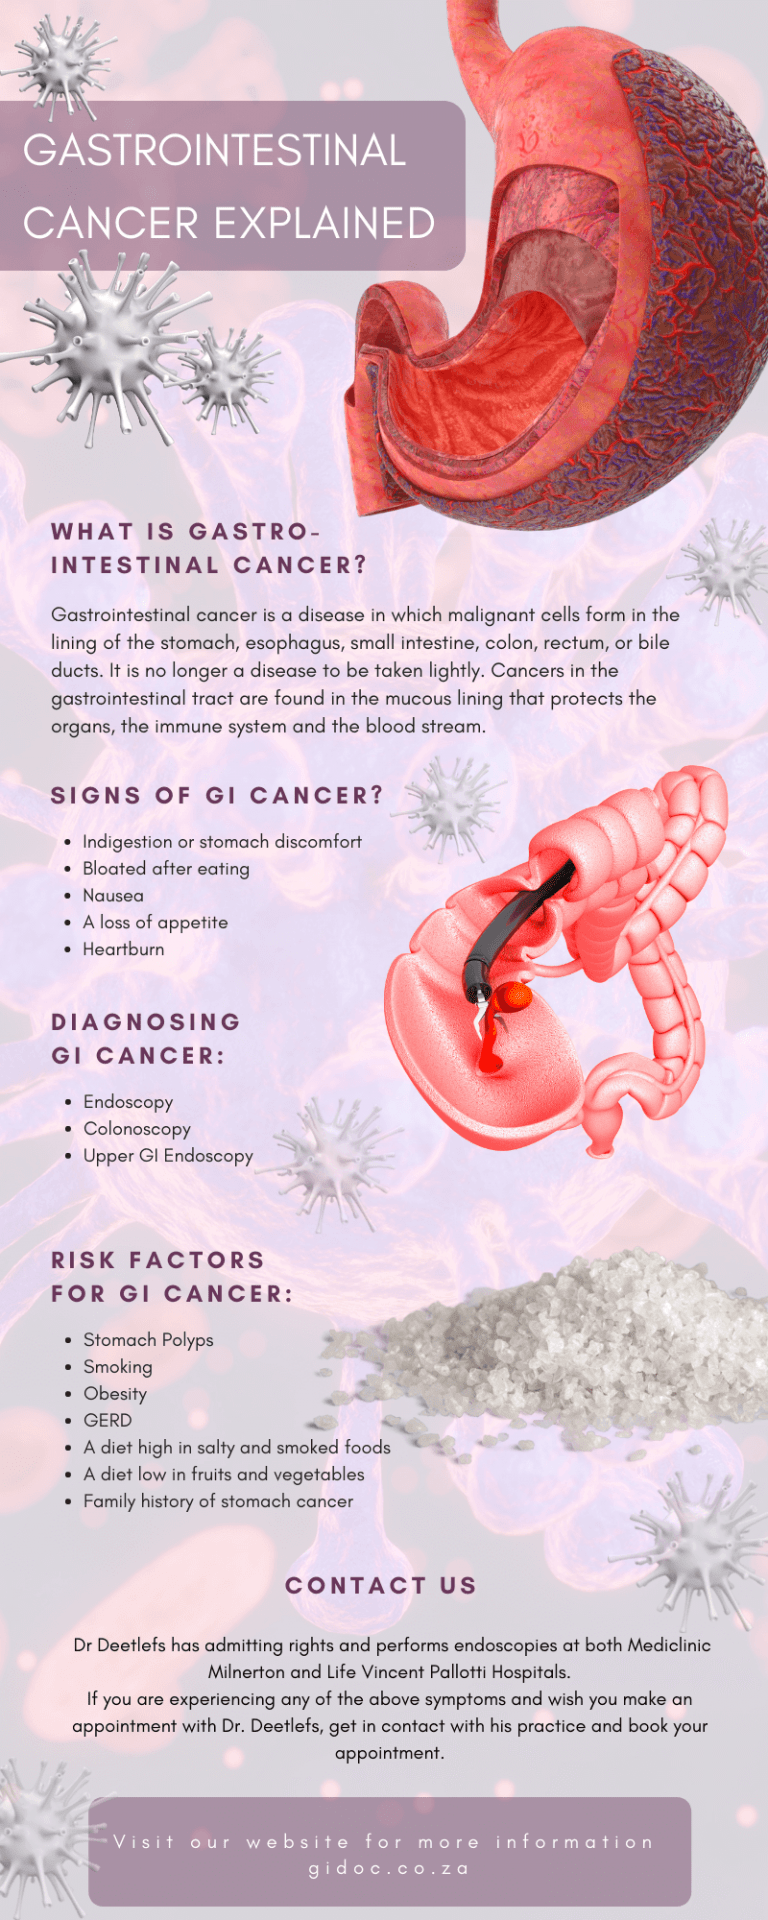 Gastrointestinal Cancer Infographic 768x1920 